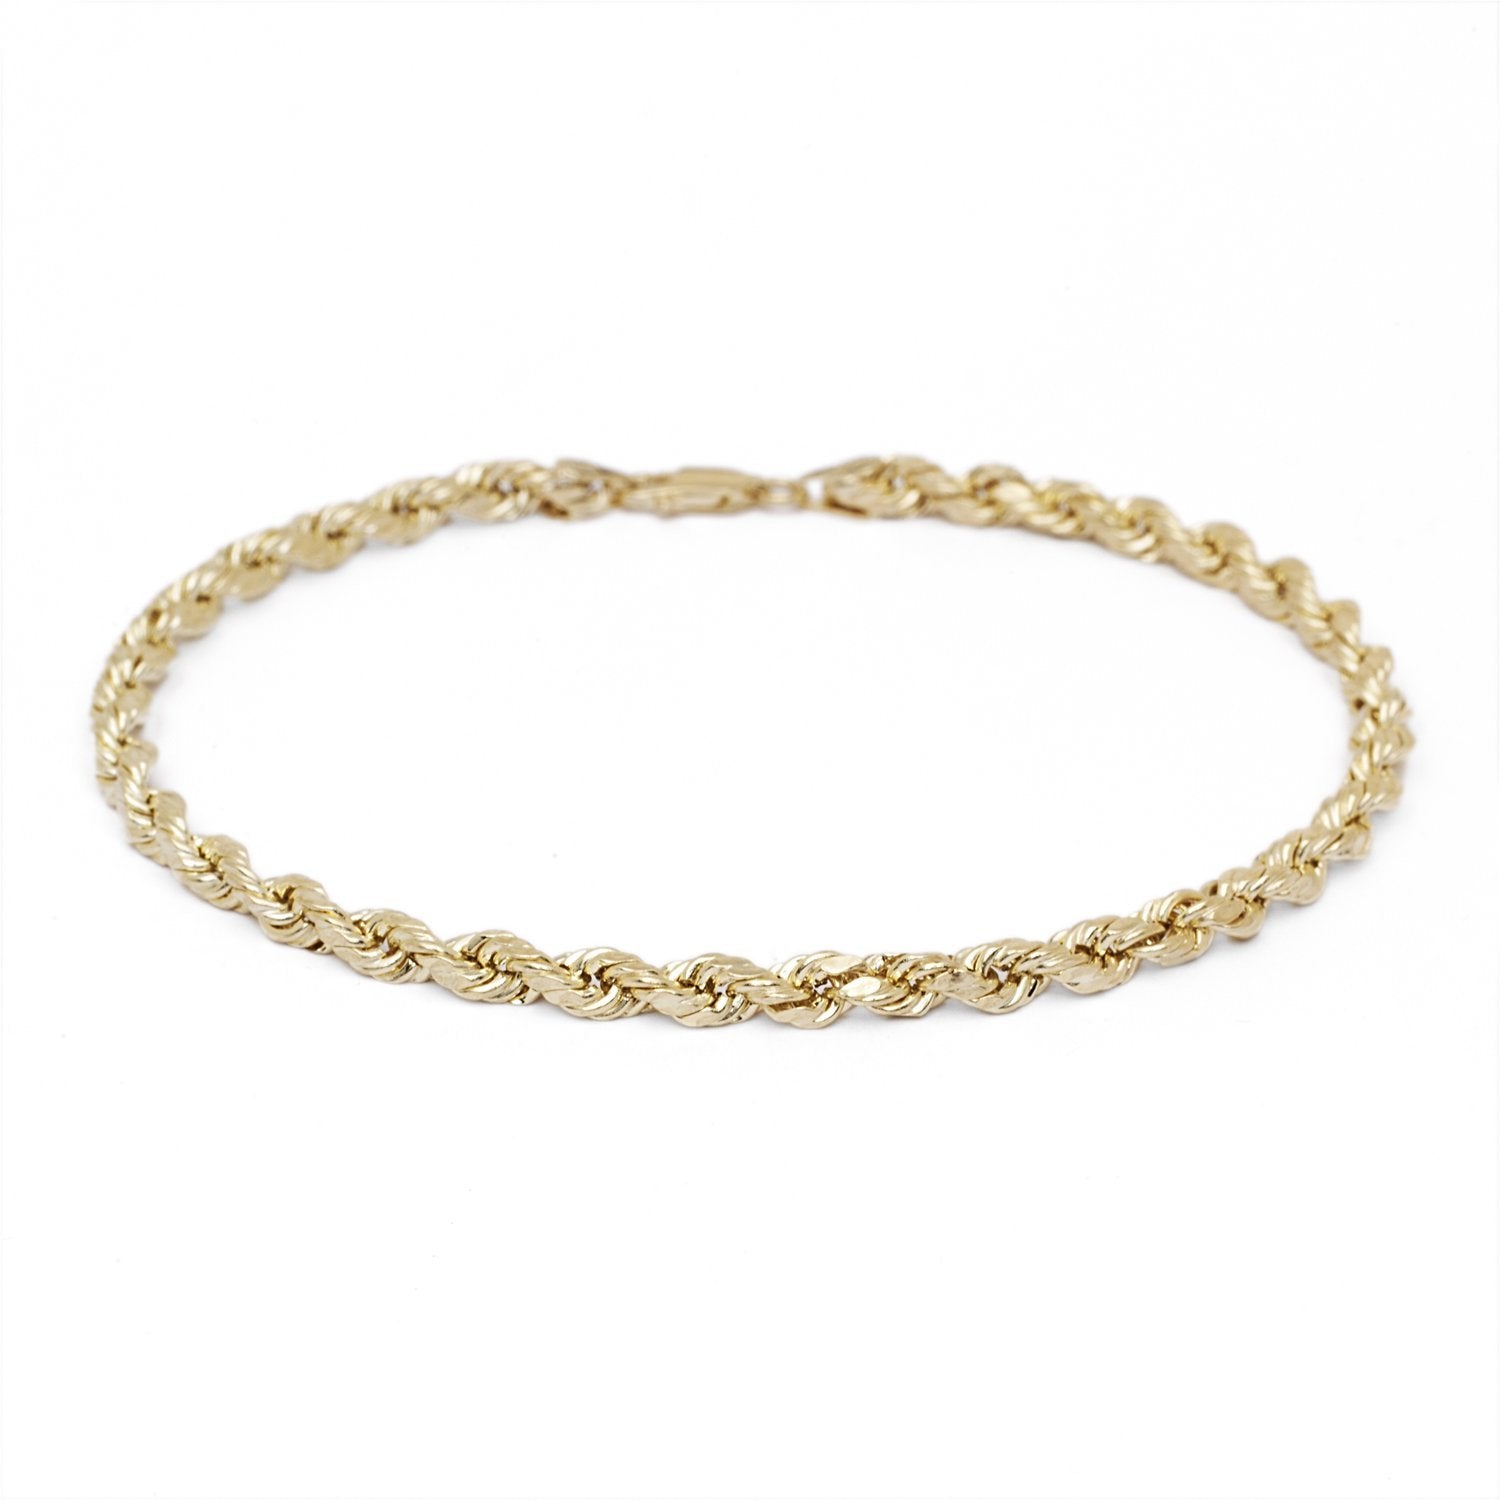 10k Yellow Gold Solid Diamond Cut Rope Chain Bracelet and Anklet, 0.14 Inch